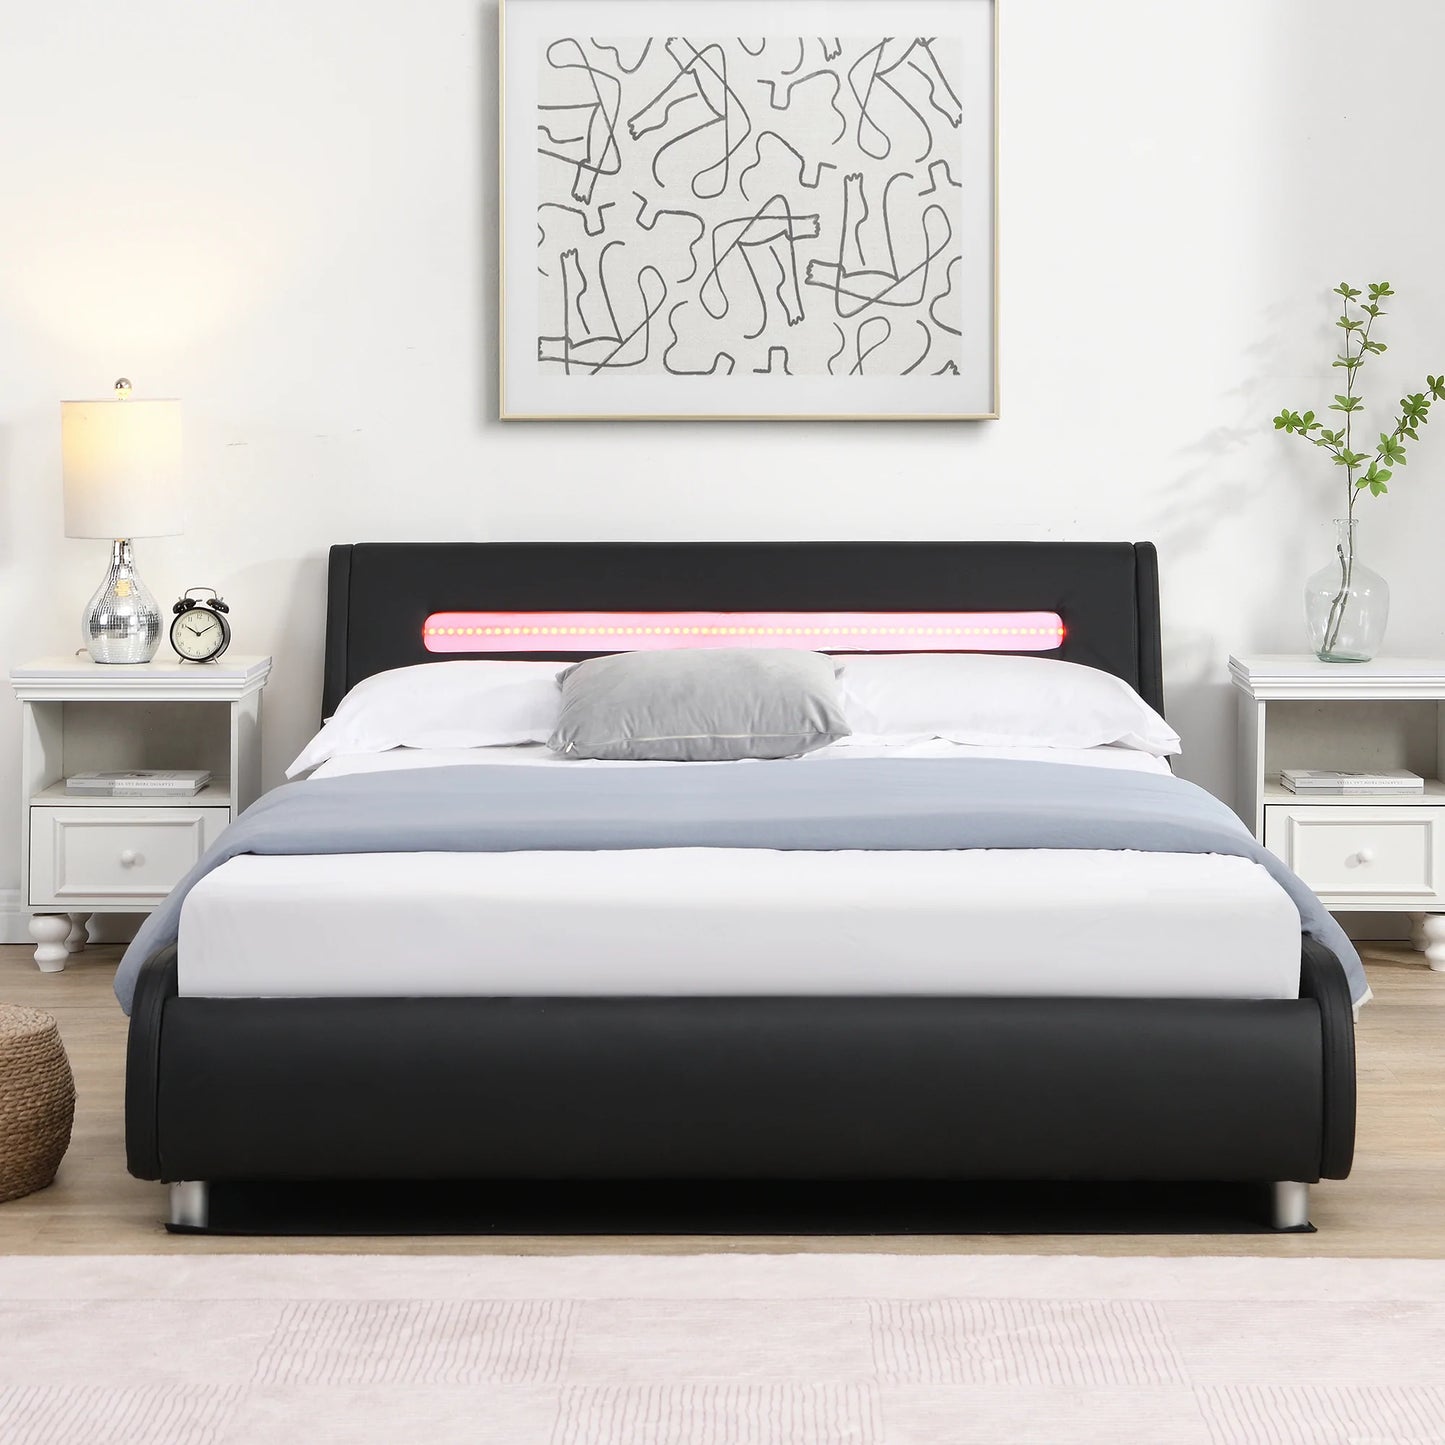 Full Size Low Profile Upholstered Platform Bed with LED headboard in Black